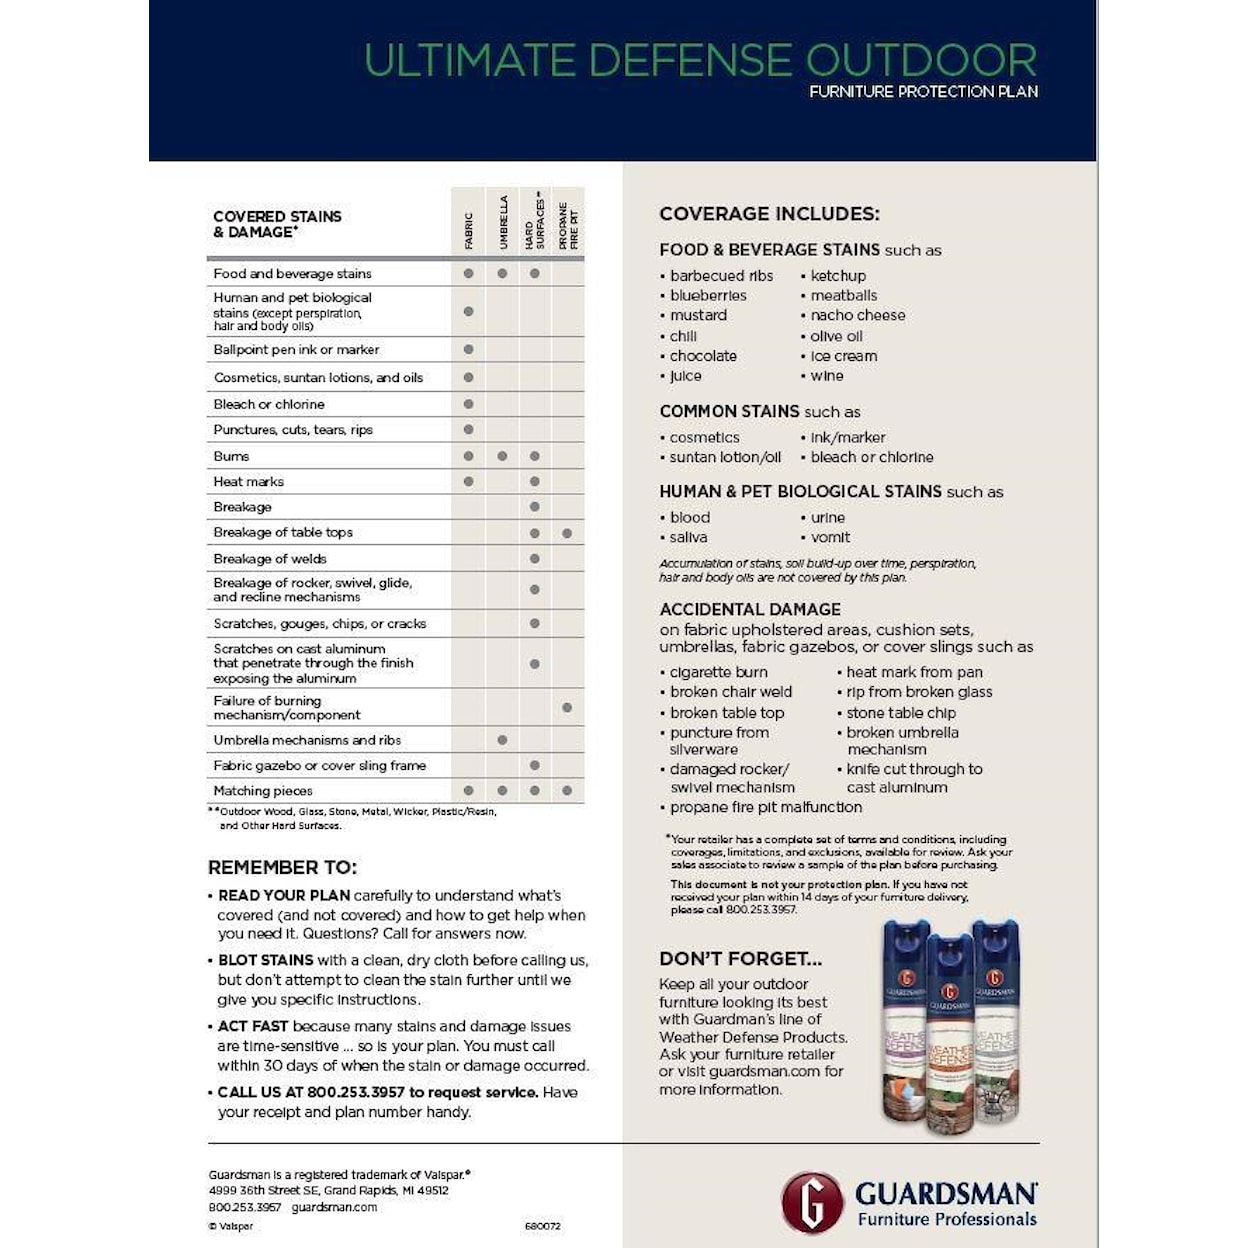 Guardsman Products Protection Plan Ultimate Defense Outdoor 5 Year